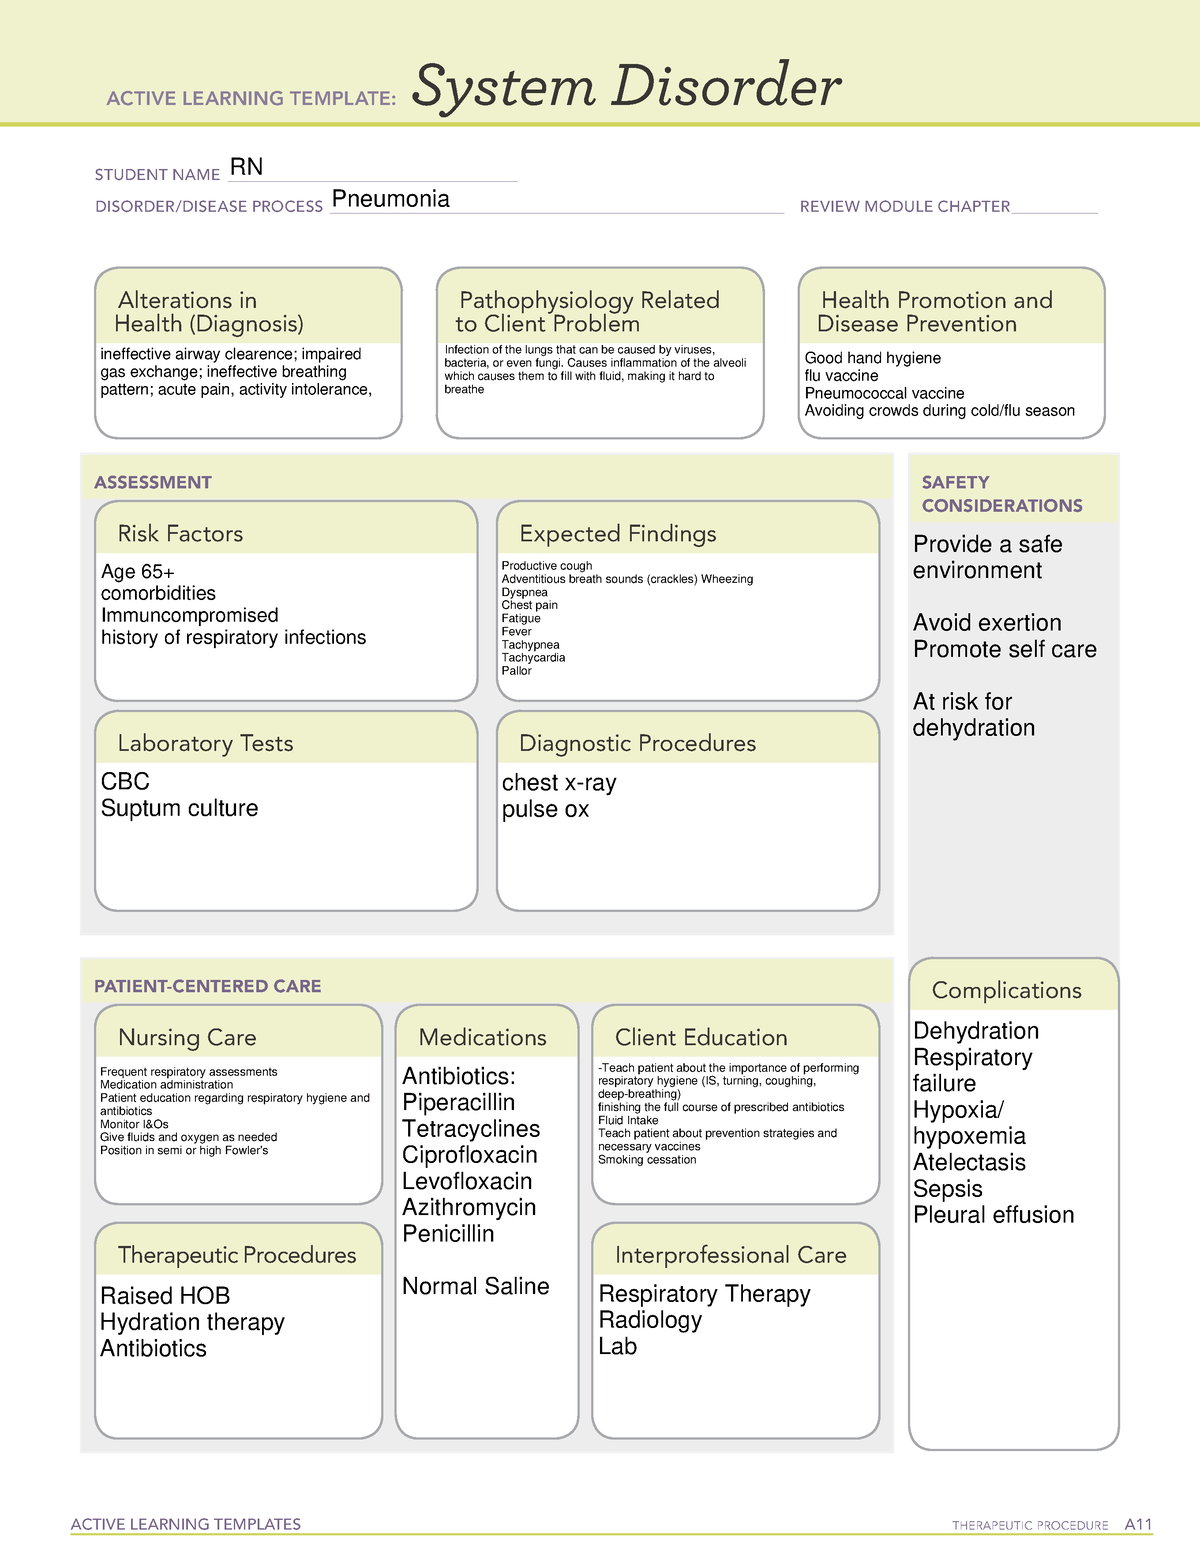 Active Learning Template sys Dis Pneumonia - ACTIVE LEARNING TEMPLATES ...